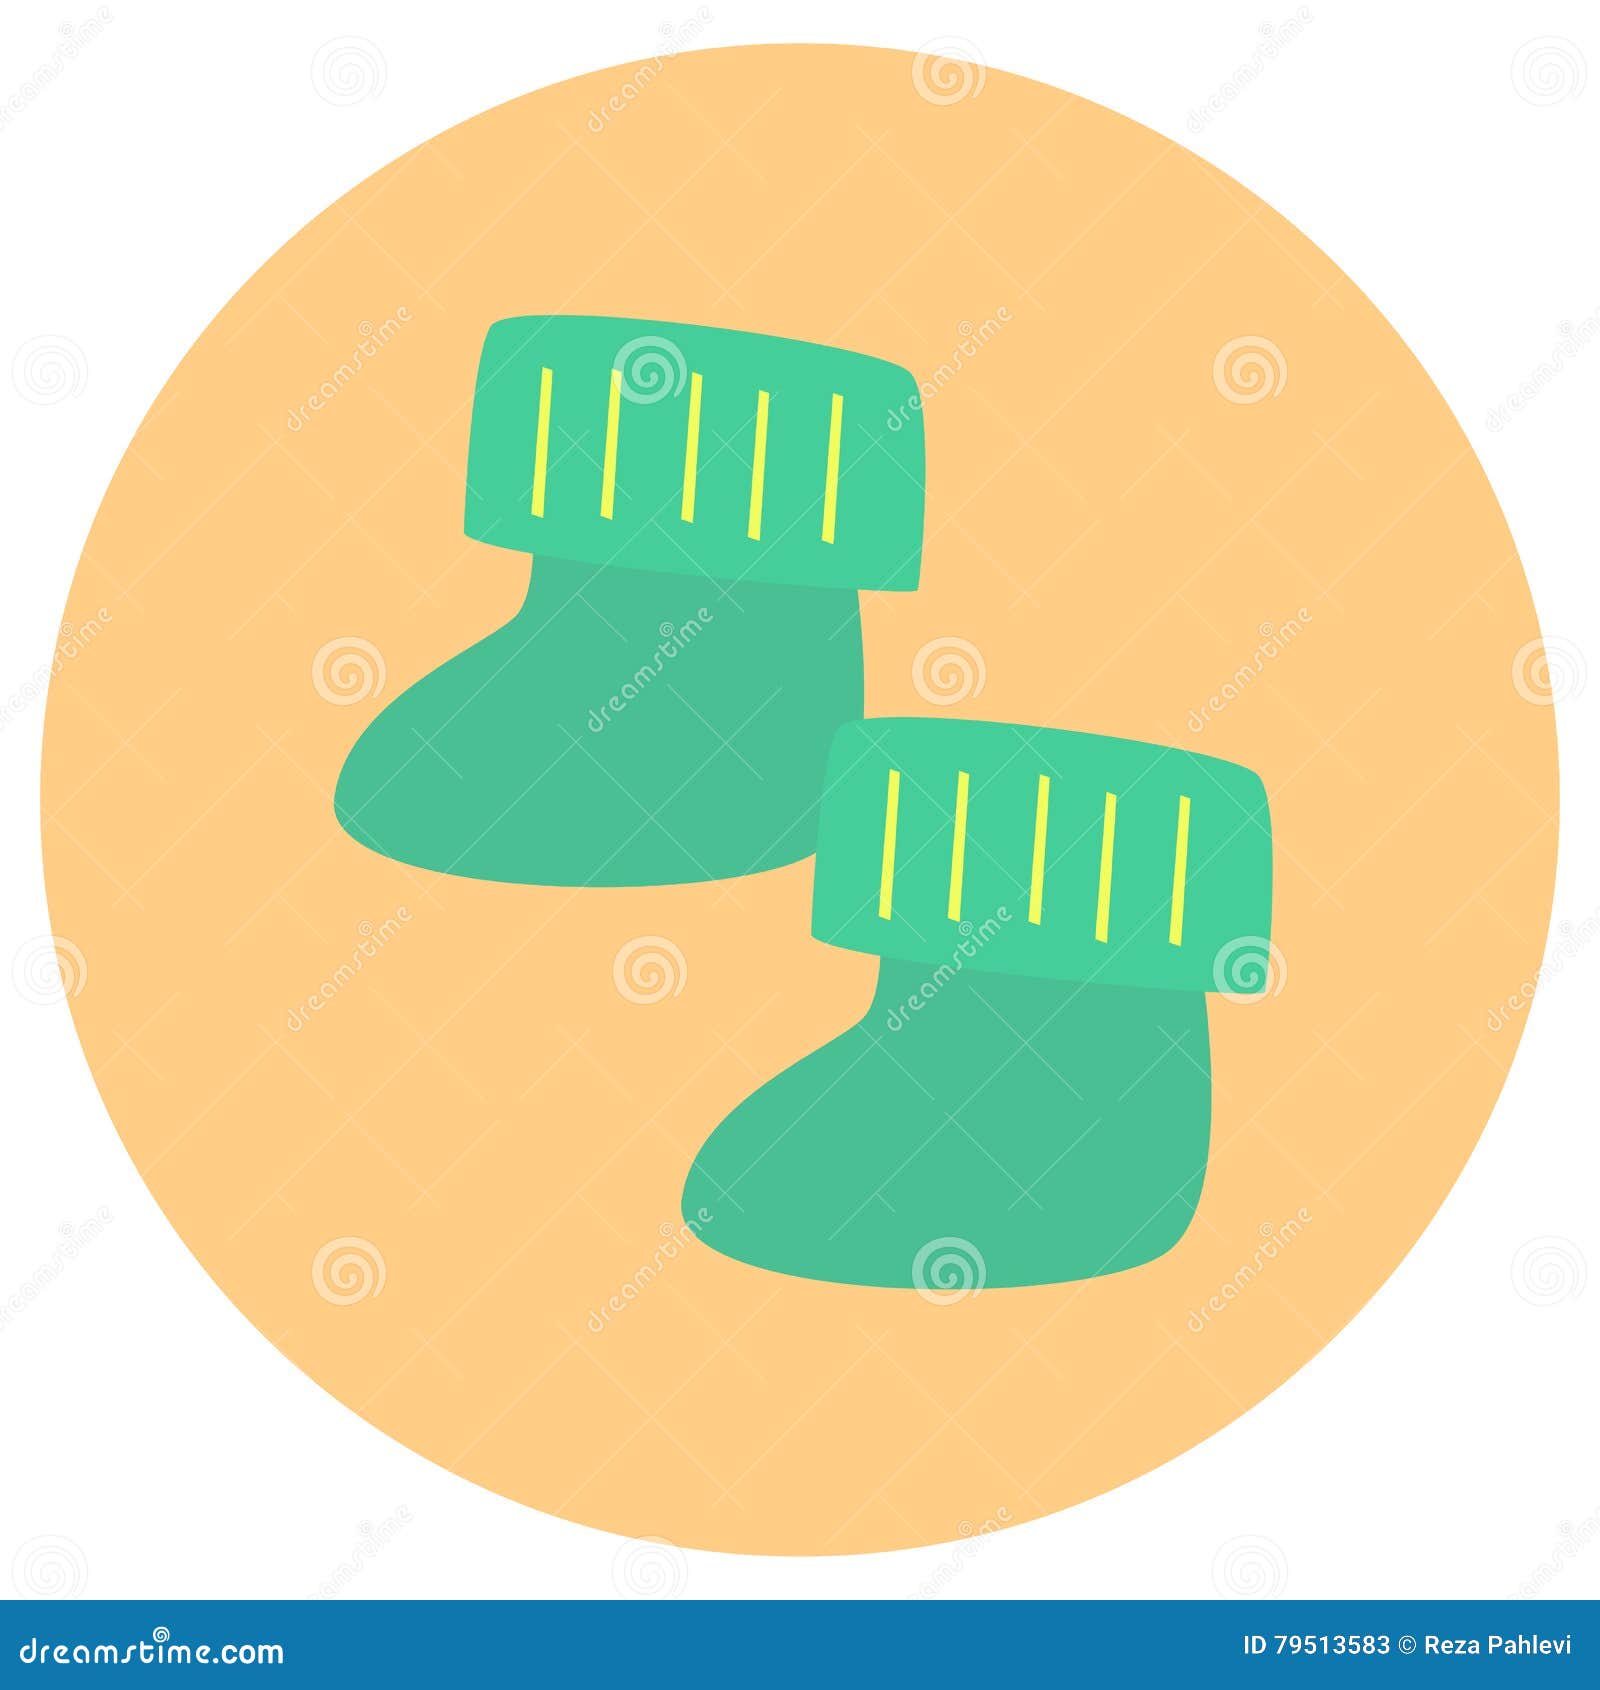 Premium Vector  A pair of cute socks in cartoon style. vector illustration  isolated on white background.